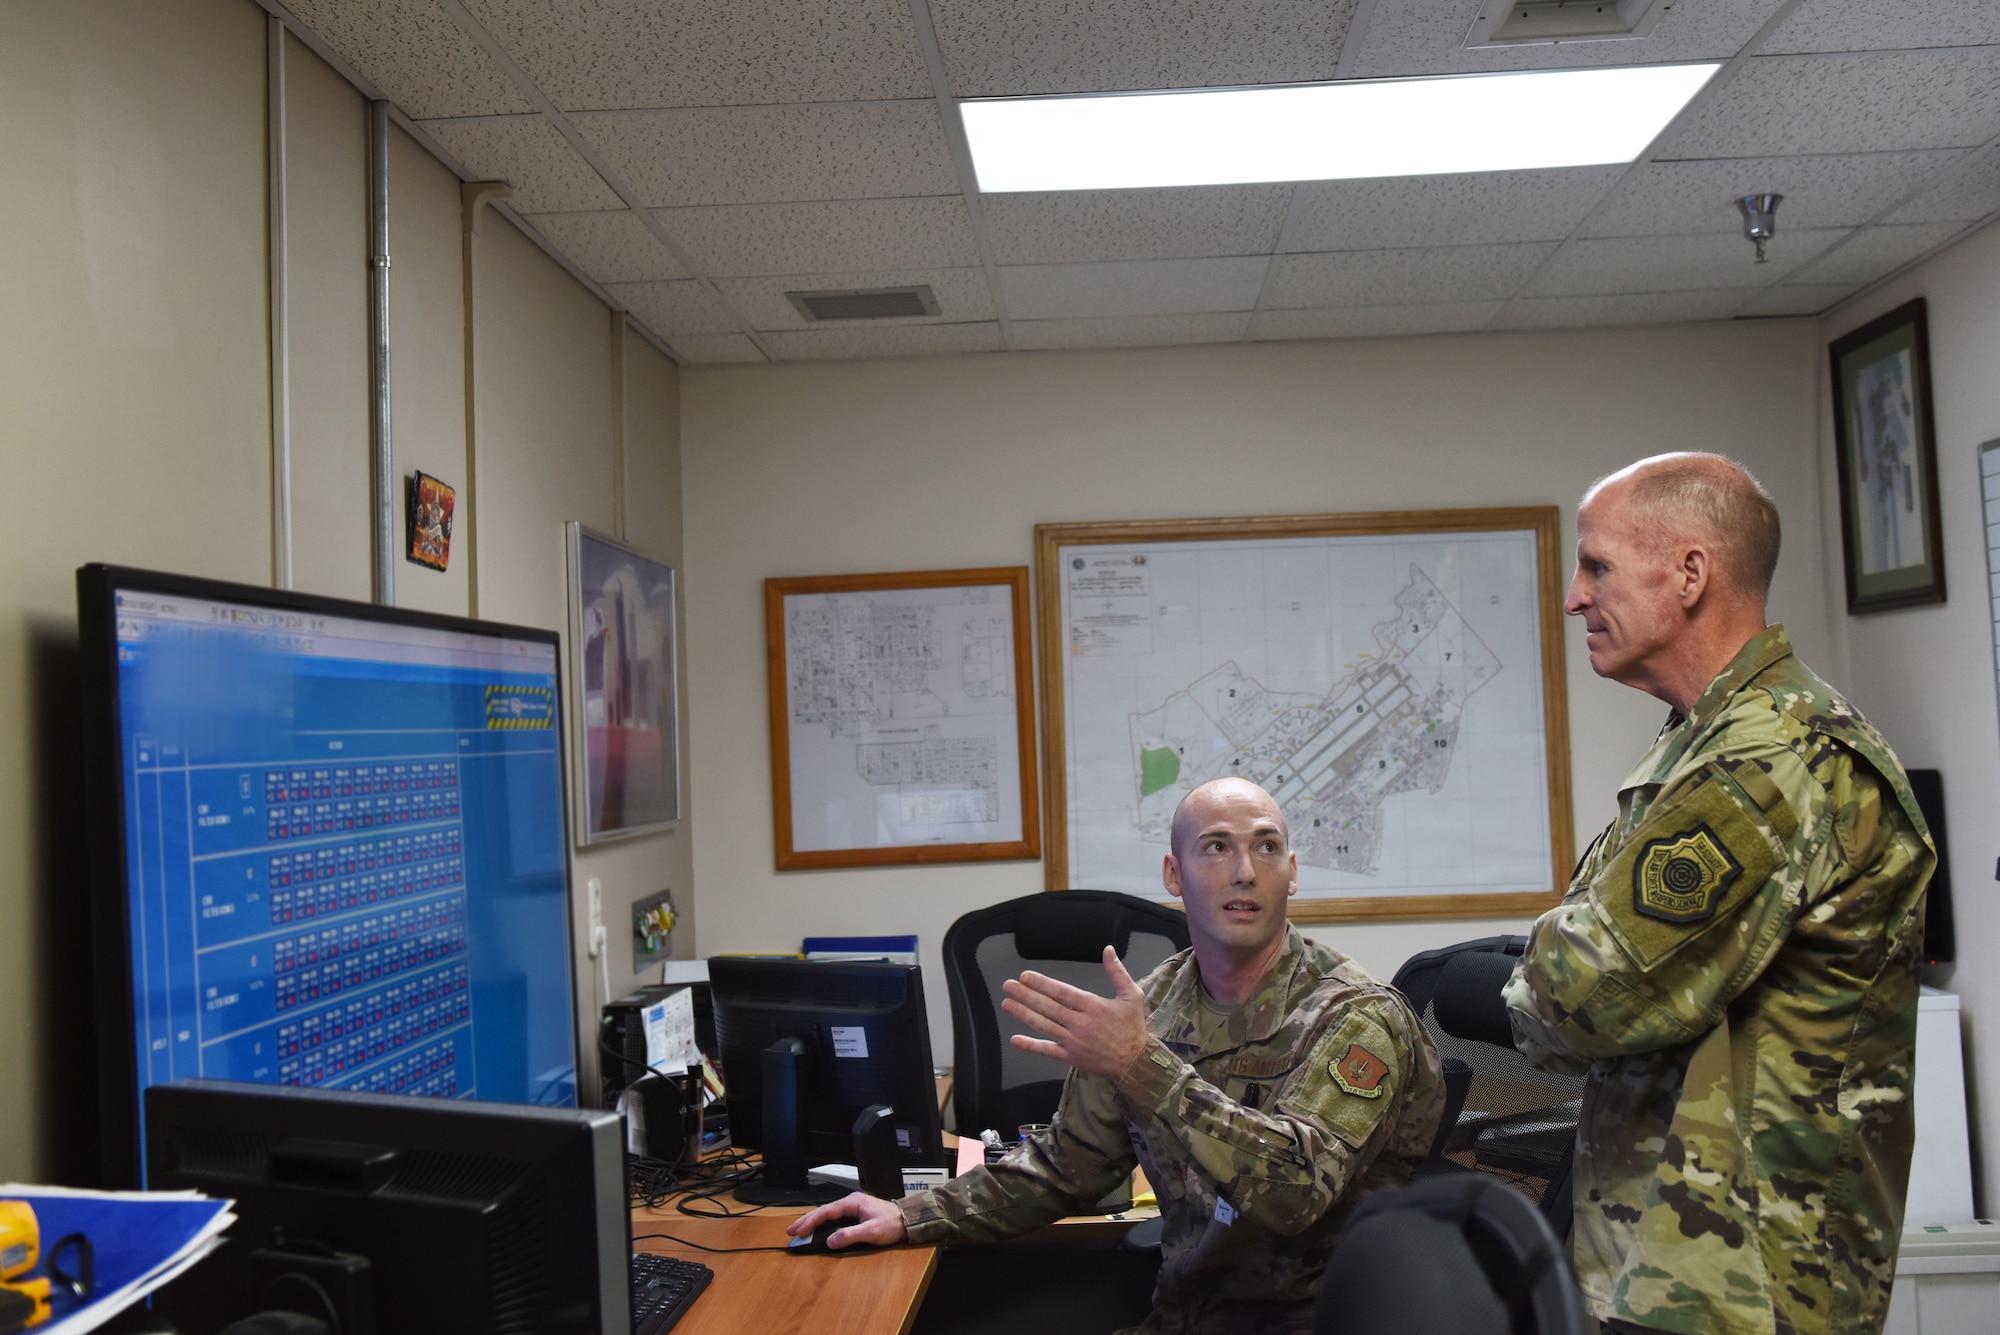 U.S. Air Force Vice Chief of Staff Stephen W. Wilson receives a briefing from Staff Sgt. Joshua Cowper, 39th Medical Support Squadron non-commissioned officer in charge of medical maintenance, during a visit to Incirlik Air Base, Sept. 30, 2019. Airmen around the installation briefed Wilson concerning the mission capabilities of their respective units. (U.S. Air Force photo by Staff Sgt. Joshua Magbanua)